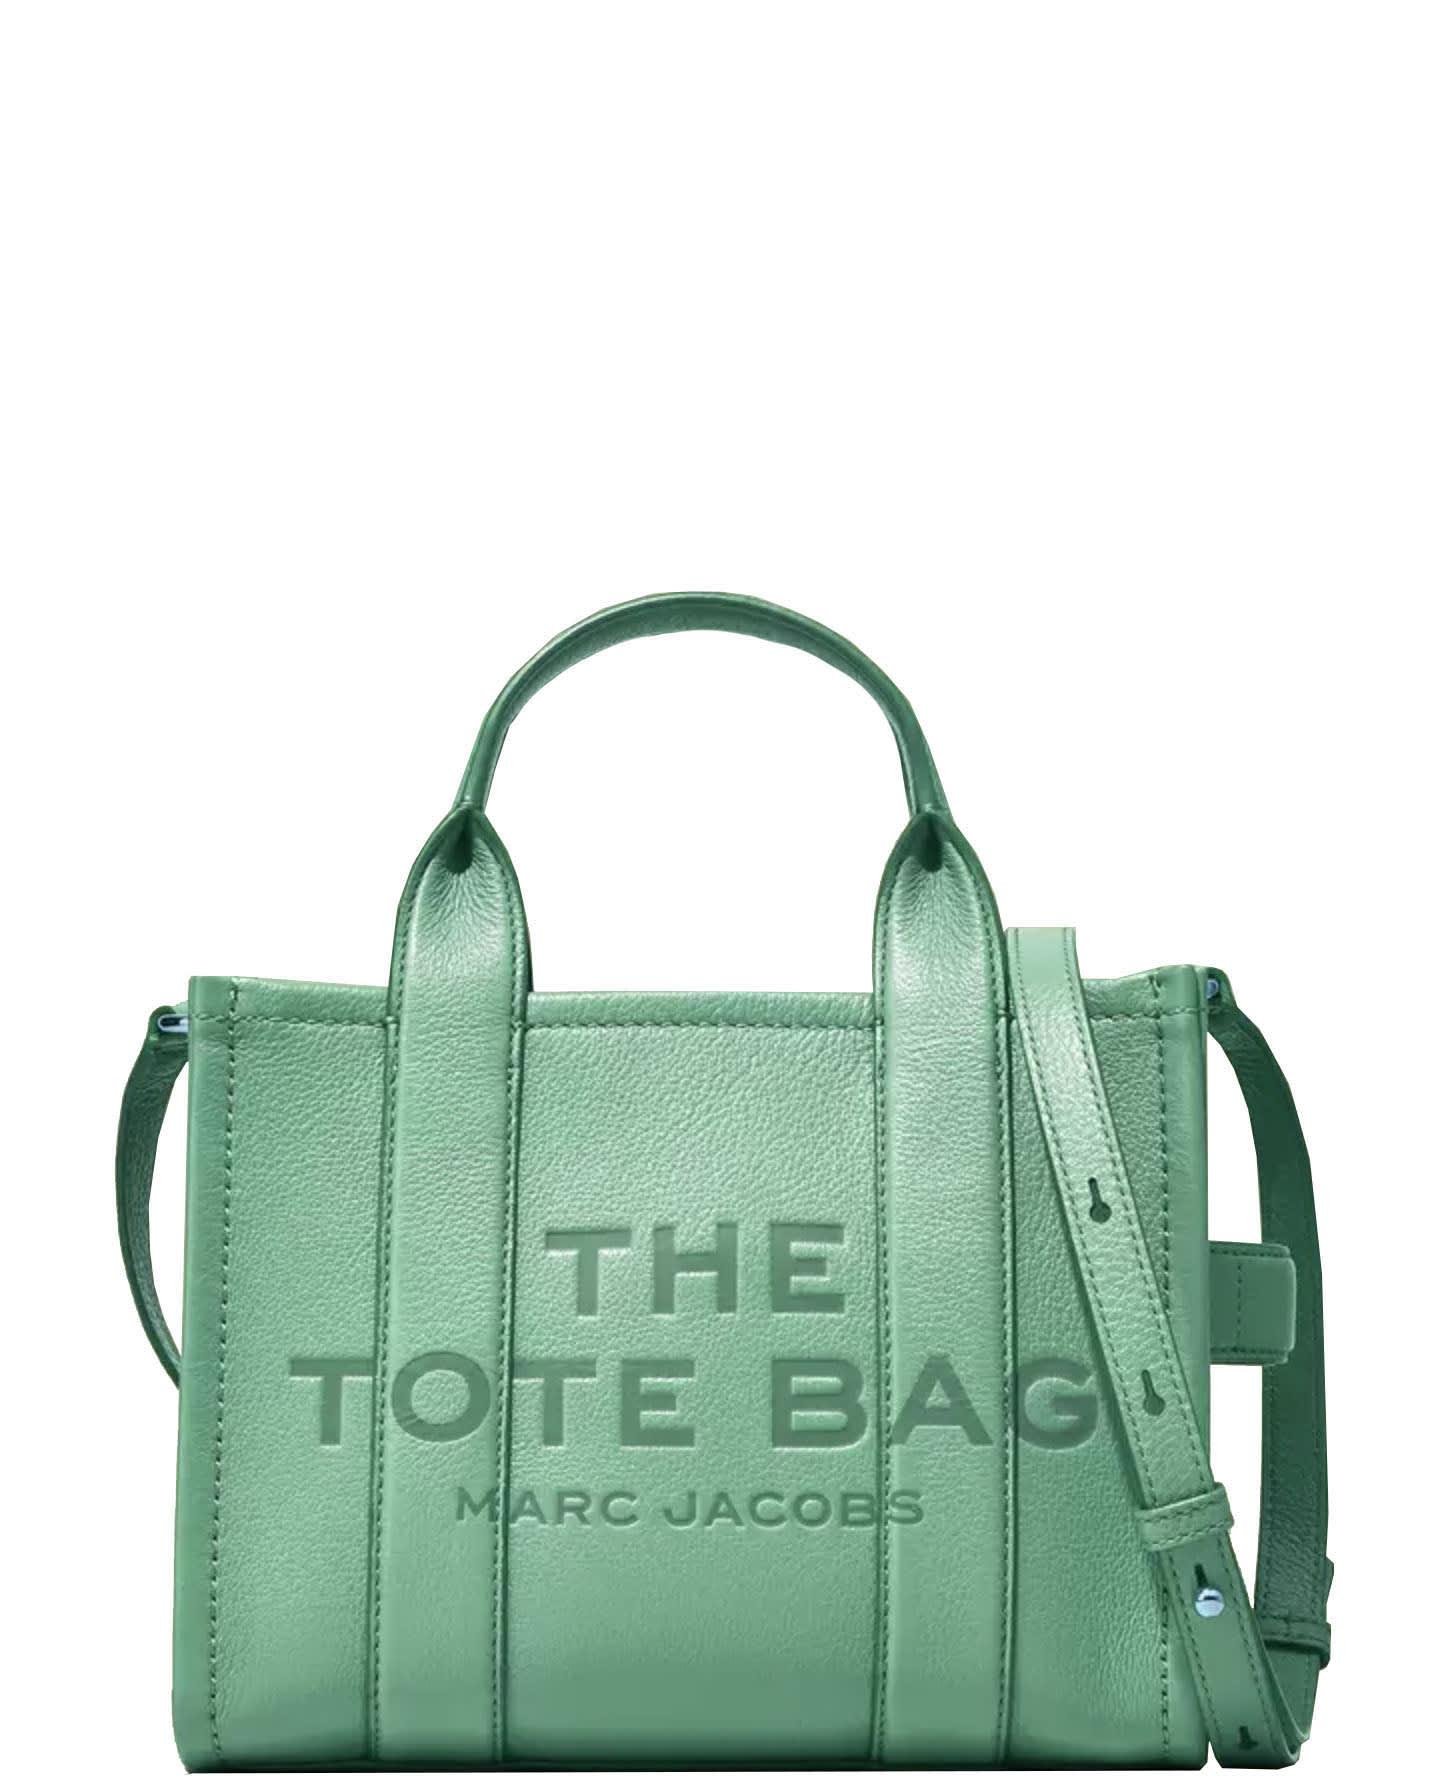 The Mini Leather Tote Bag in Black - Marc Jacobs